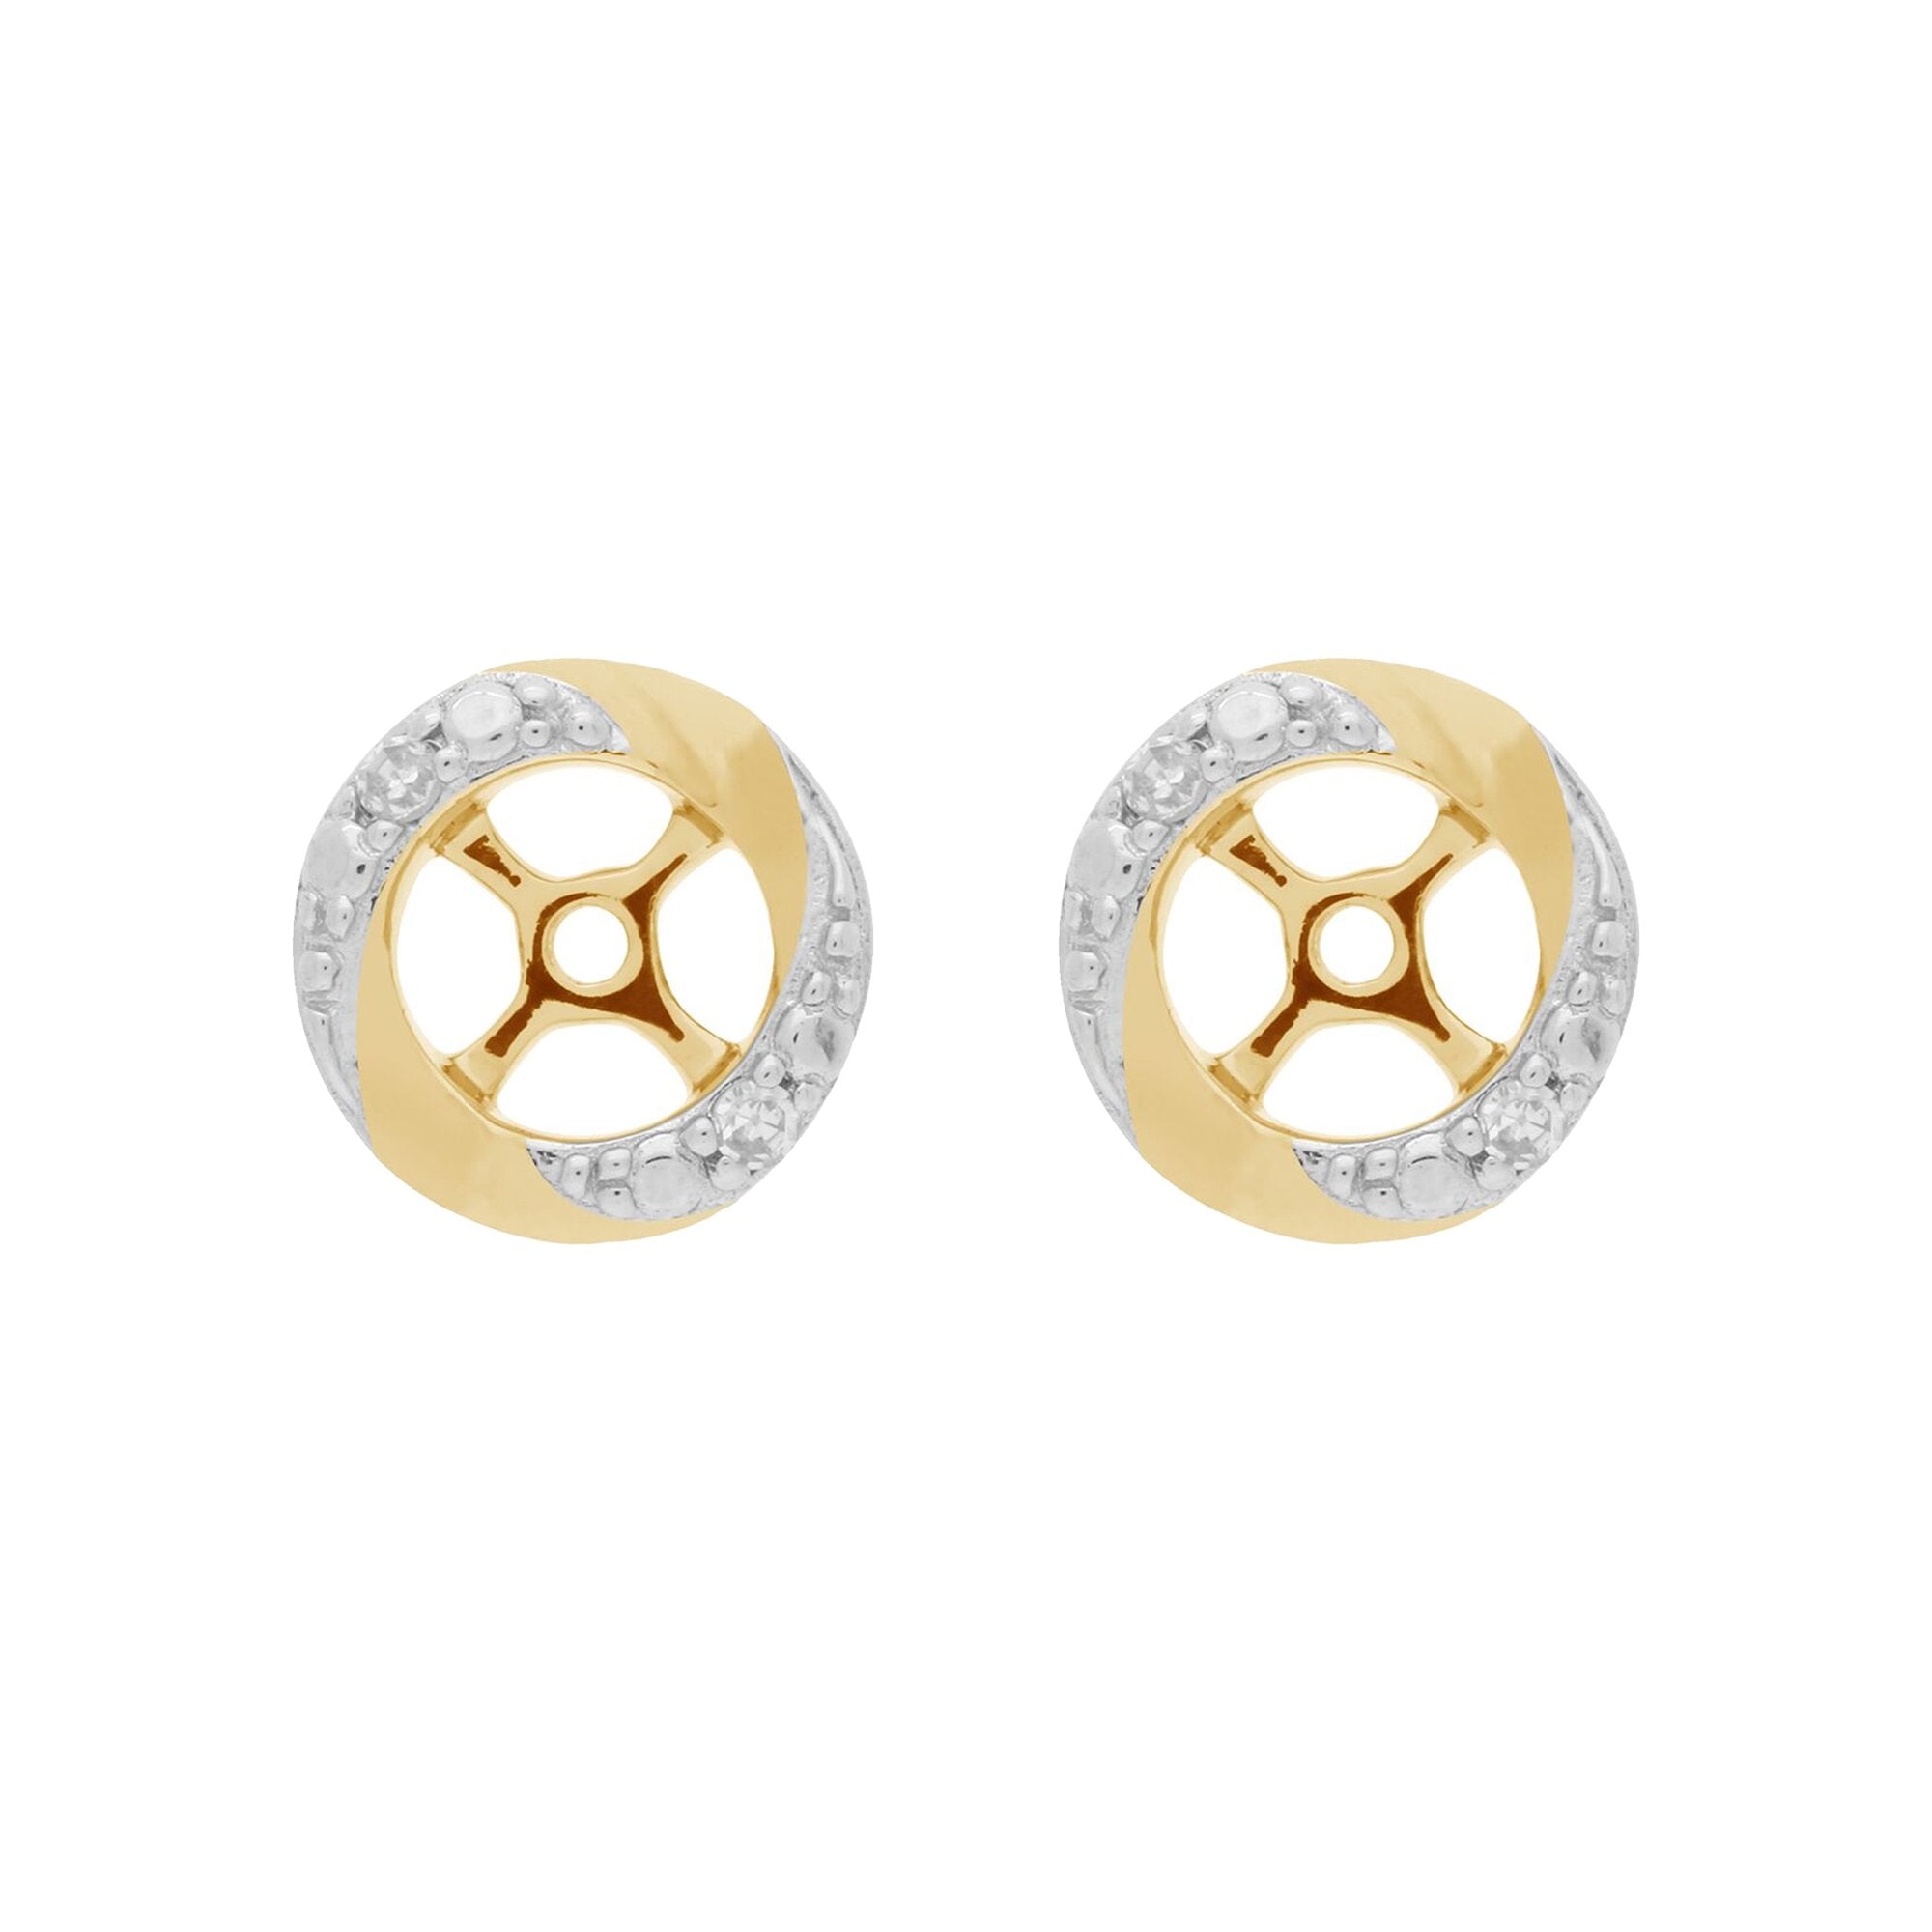 Classic Round Diamond Earring Jacket in Two Tone Yellow & Rhodium Plated 9ct Gold